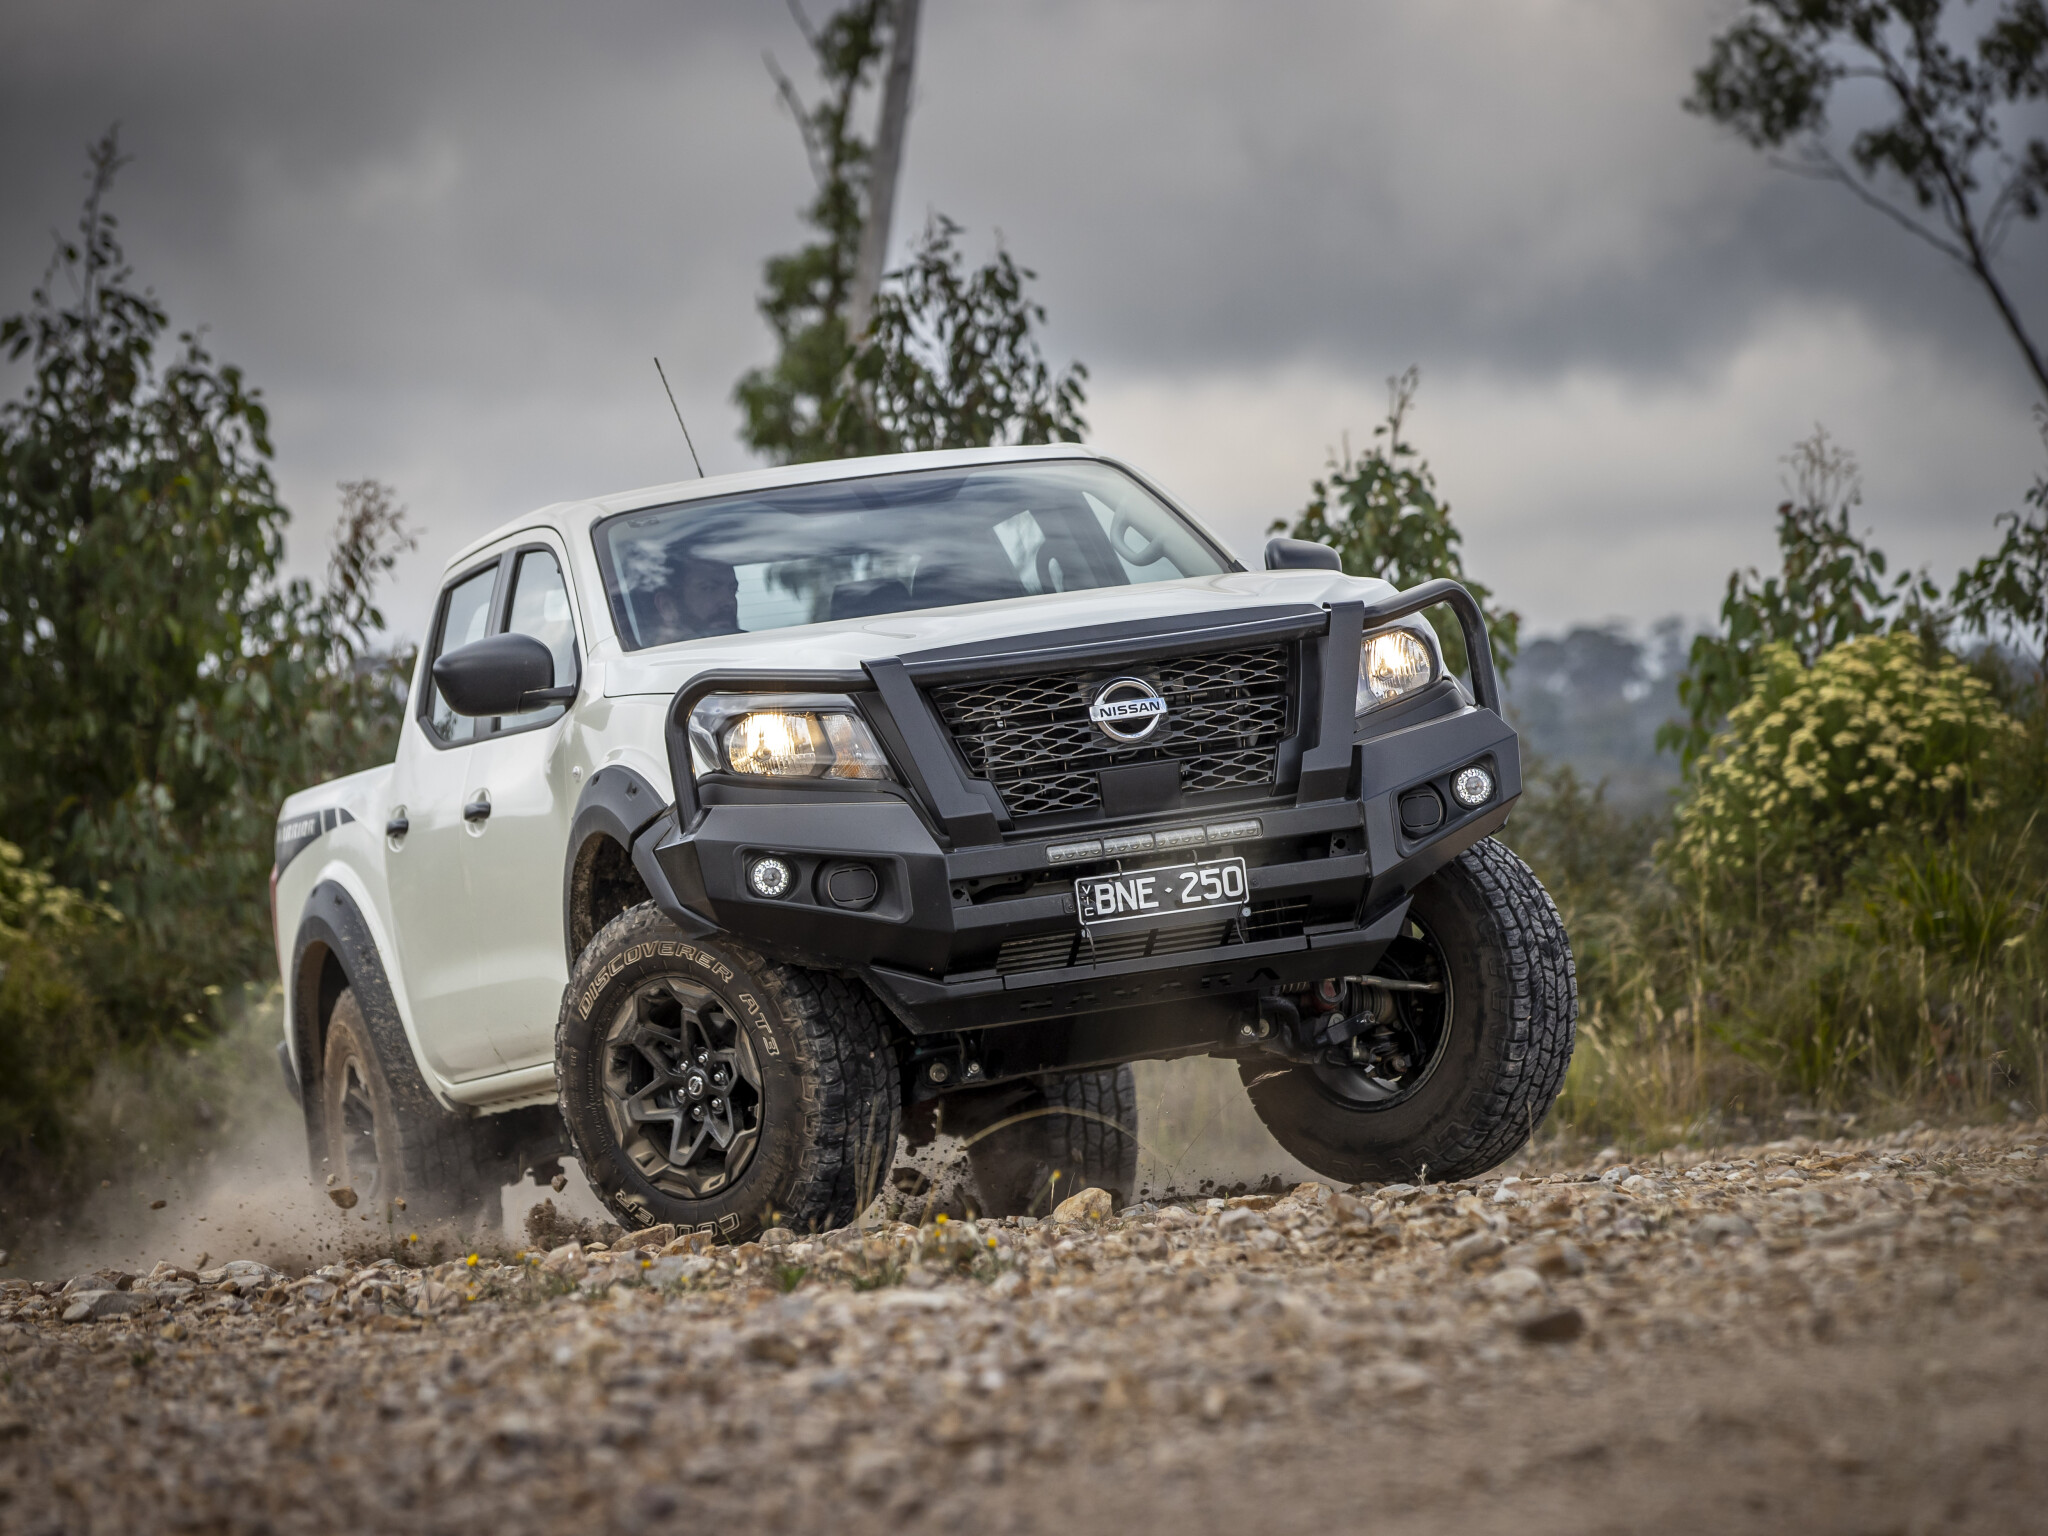 2022 Nissan Navara Pro-4X review: Does the double cab 4x4 make sense as a  dual-purpose family vehicle and SUV alternative?